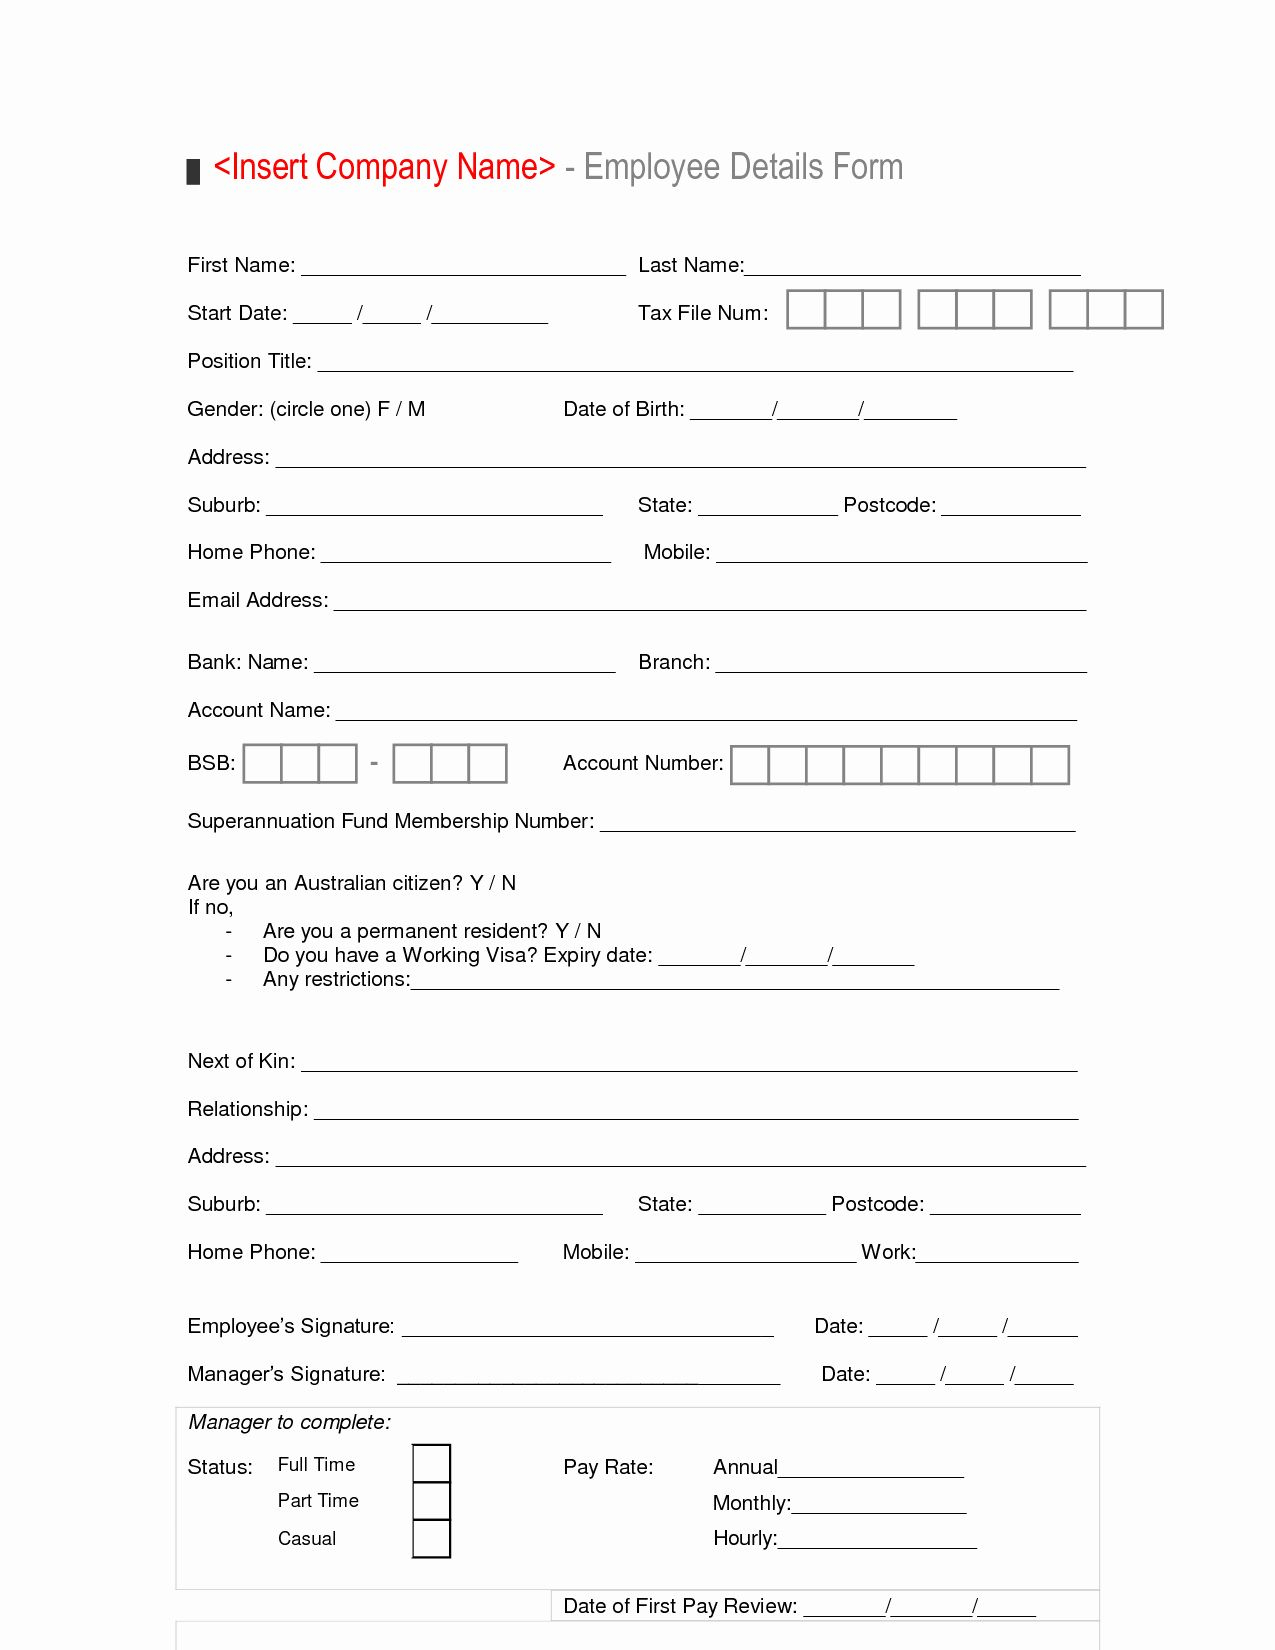 Employment Information Form Template Luxury New Hire Employee Details